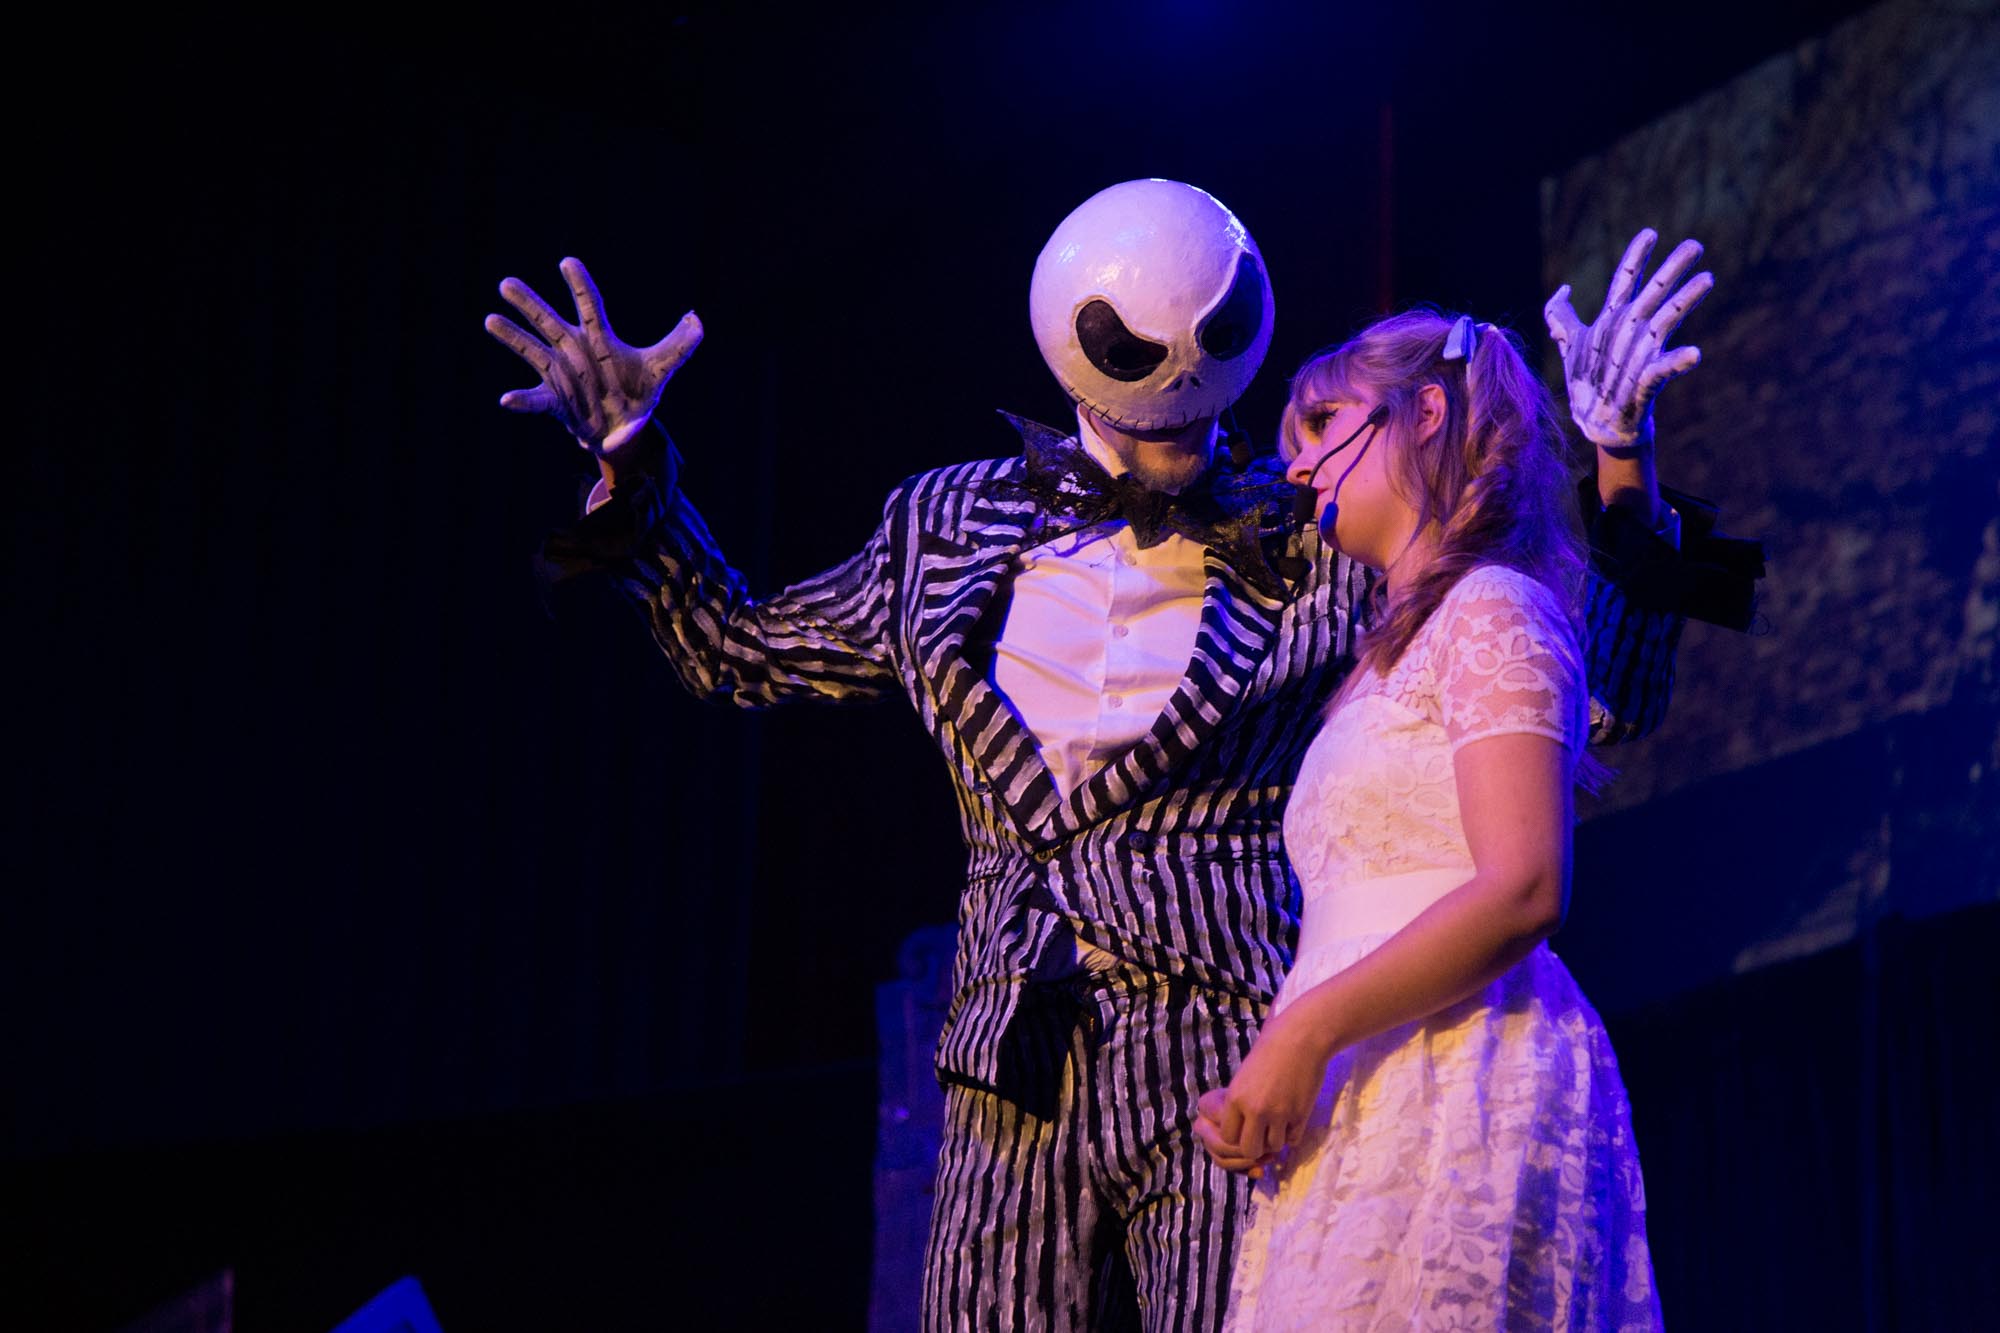 nightmare before christmas stage musical